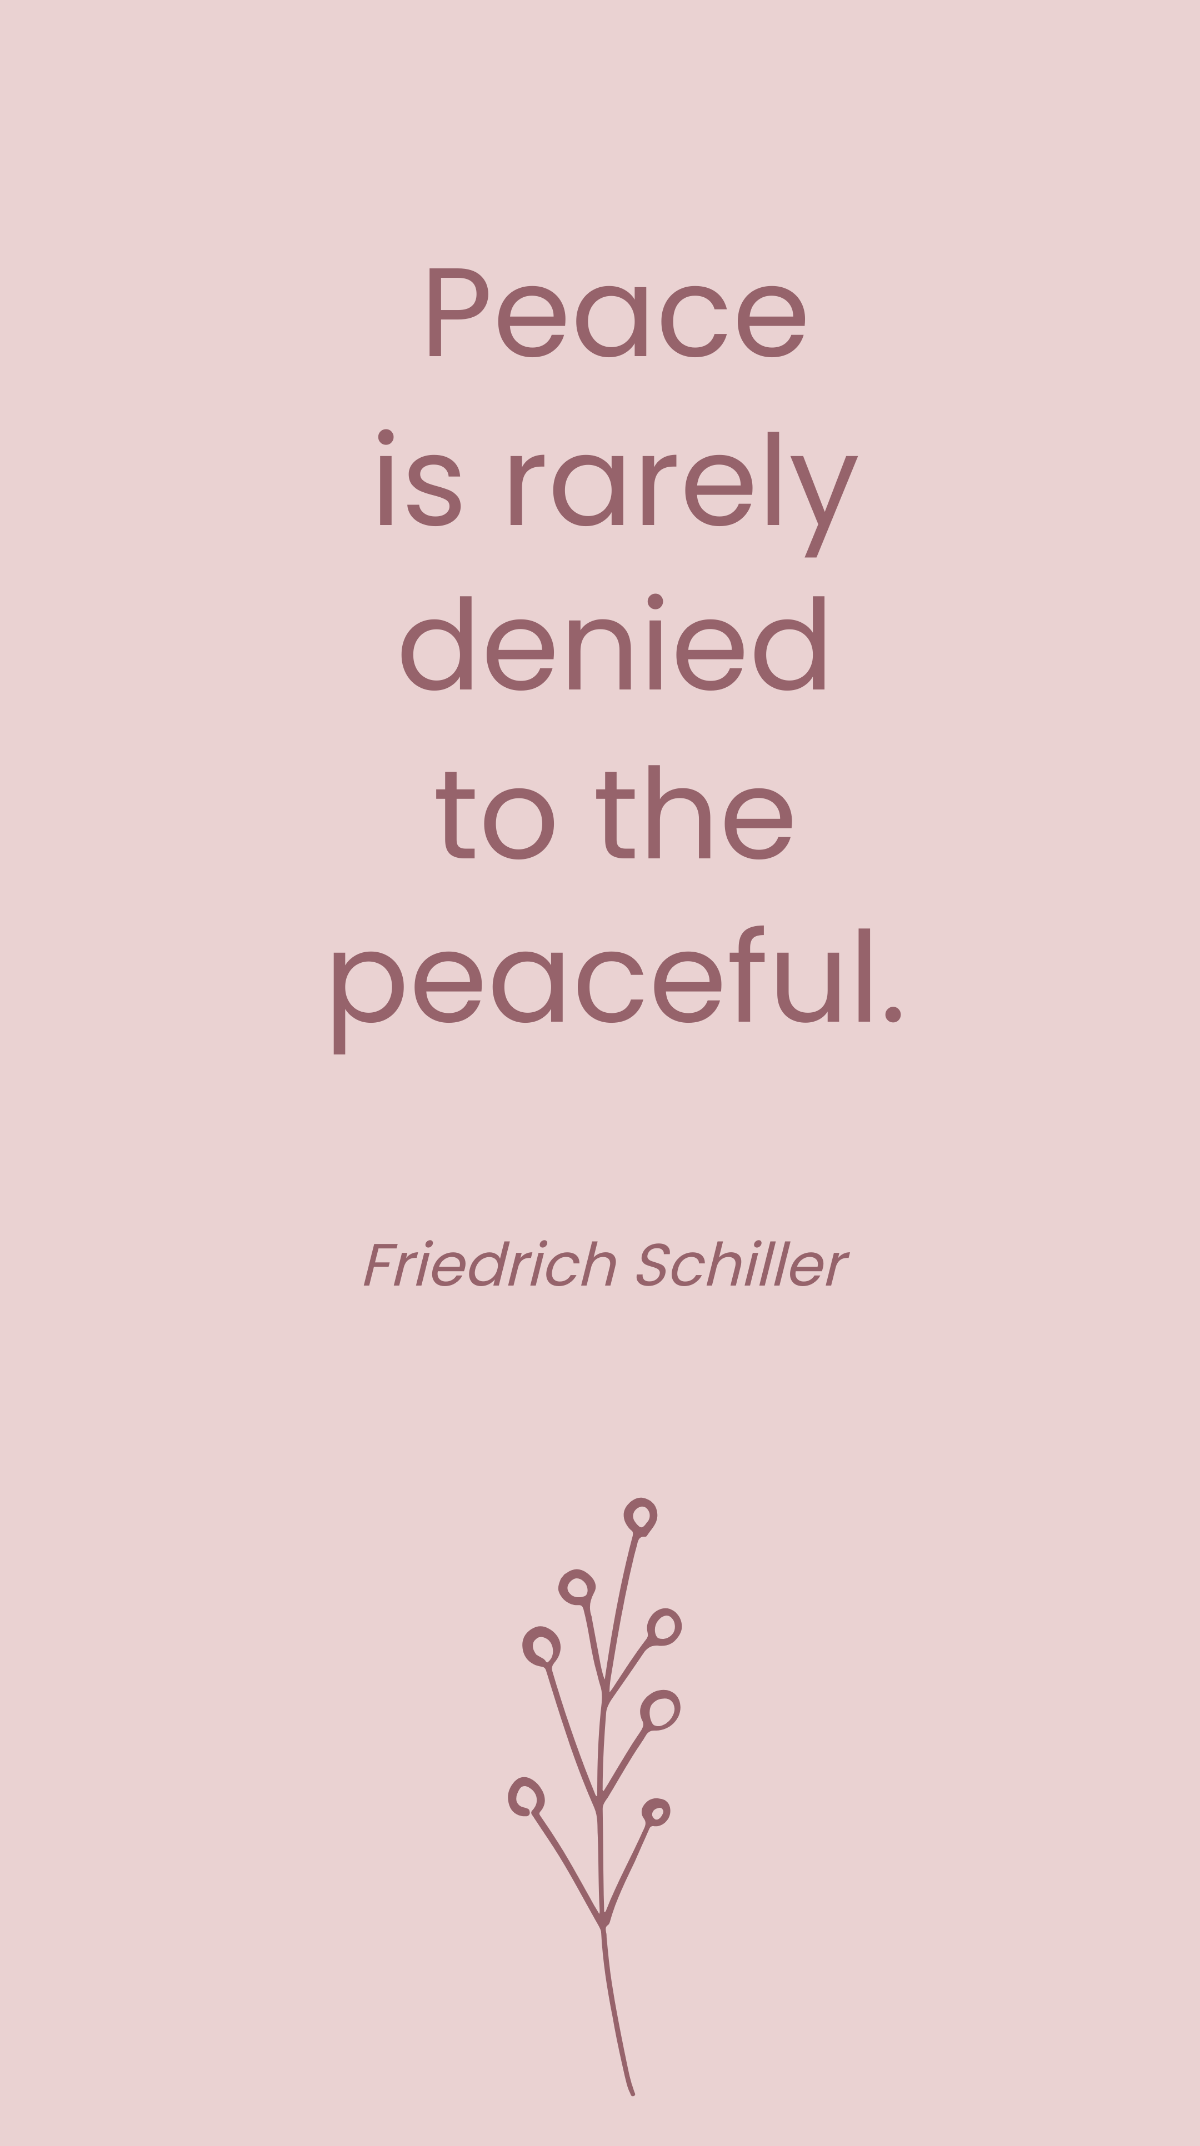 Free Friedrich Schiller - Peace is rarely denied to the peaceful. Template